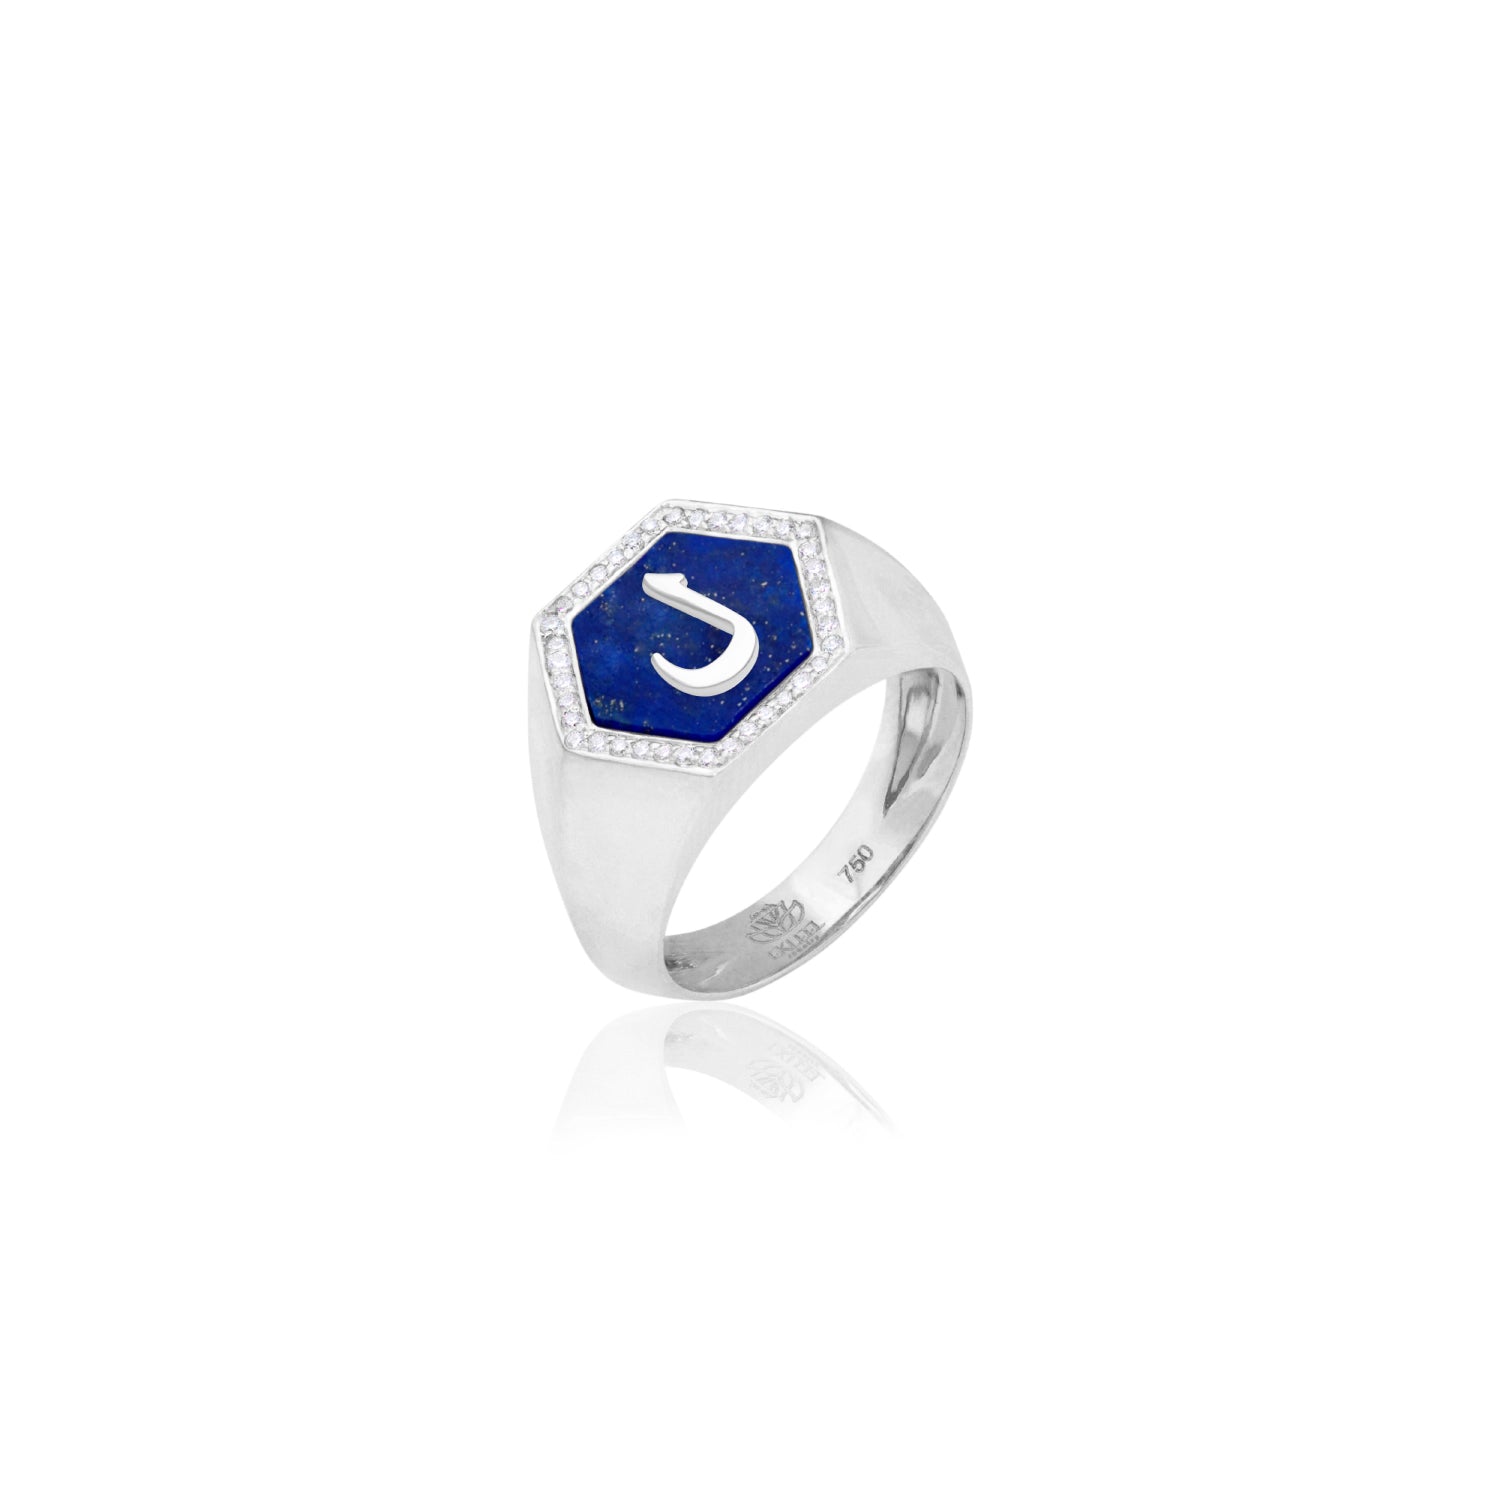 Qamoos 2.0 Letter ل Lapis Lazuli and Diamond Signet Ring in White Gold